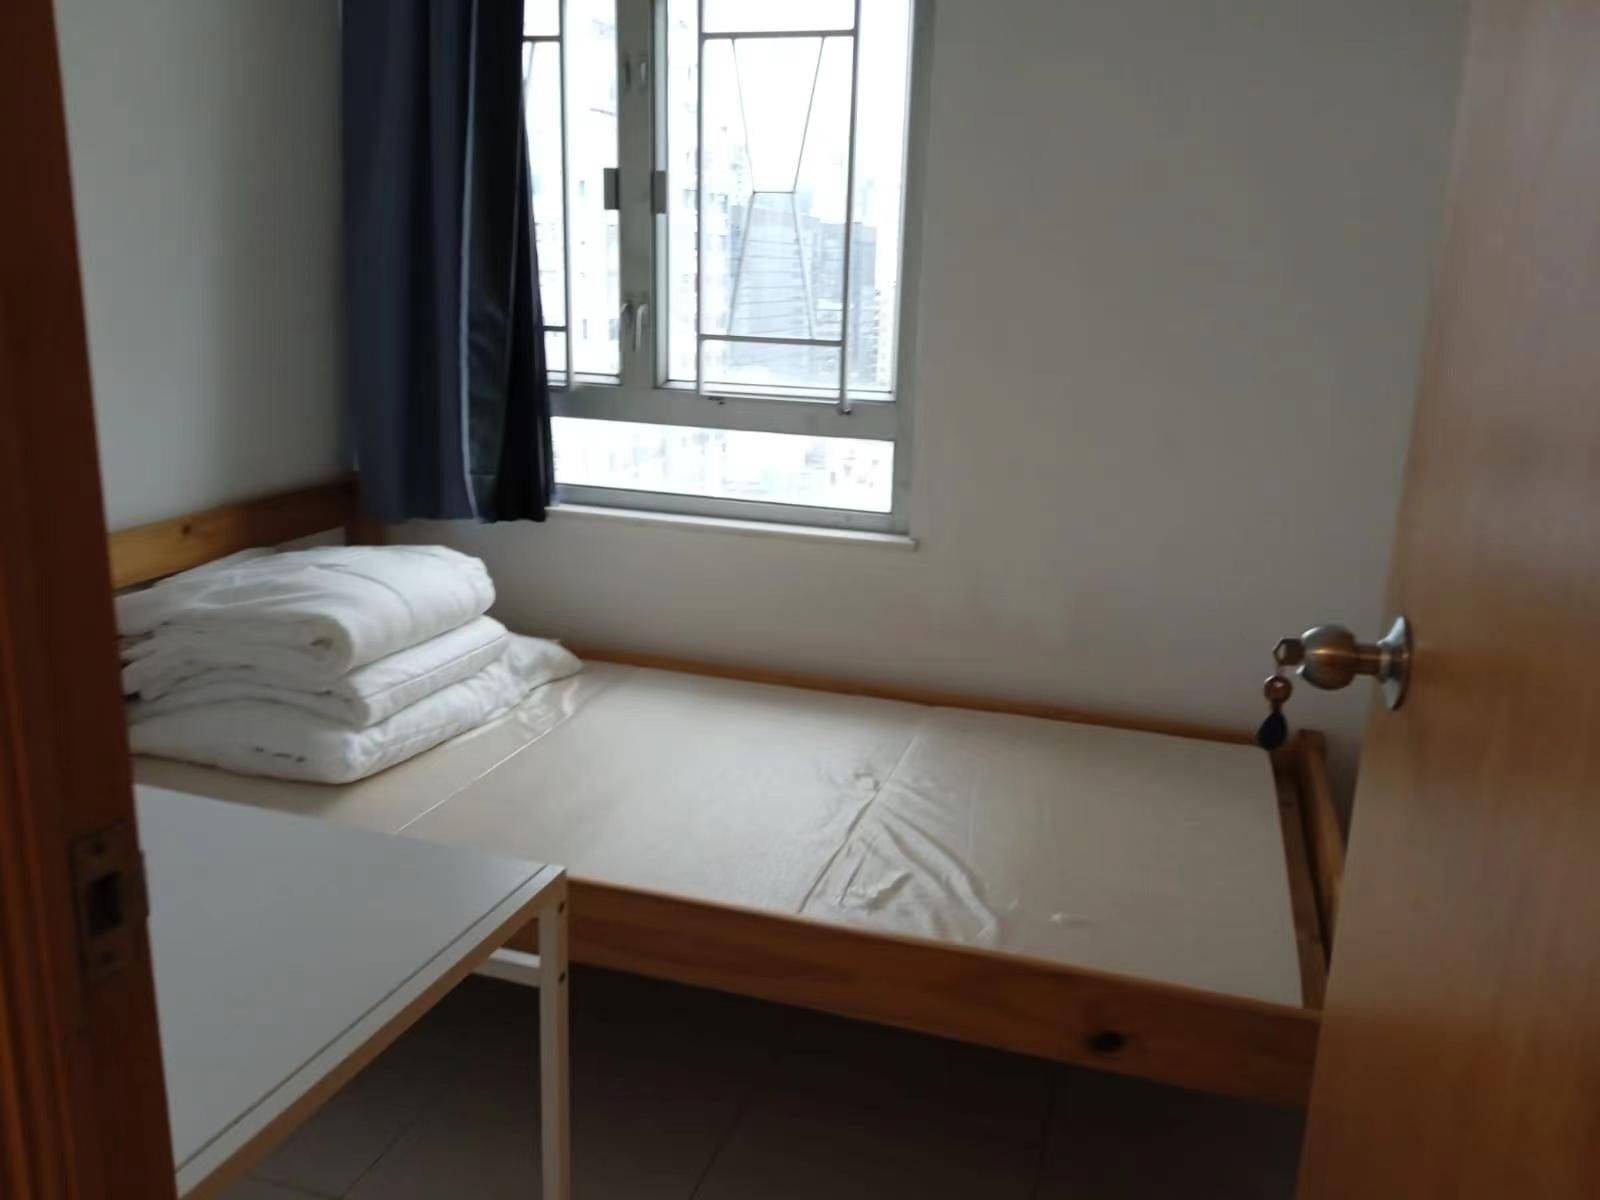 Hong Kong-Kowloon-Cozy Home,Clean&Comfy,No Gender Limit,Chilled,LGBTQ Friendly